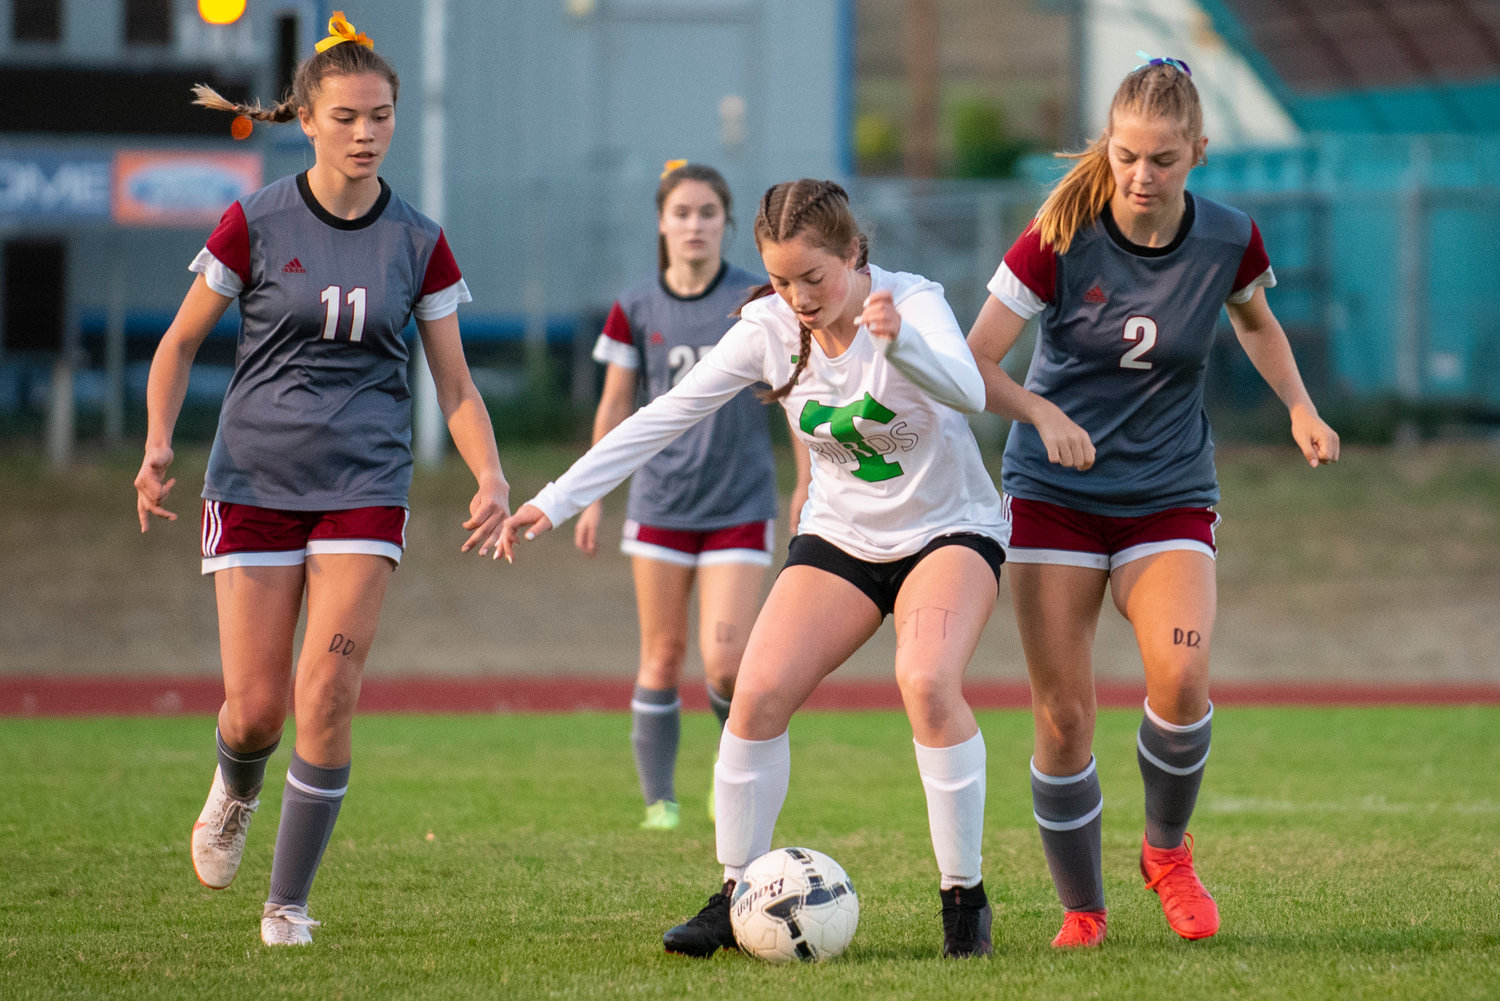 W.F. West's Olivia Remund (11) and Maddy Casper (2) defend against Tumwater's Olivia Kee (7) on Tuesday in Chehalis.